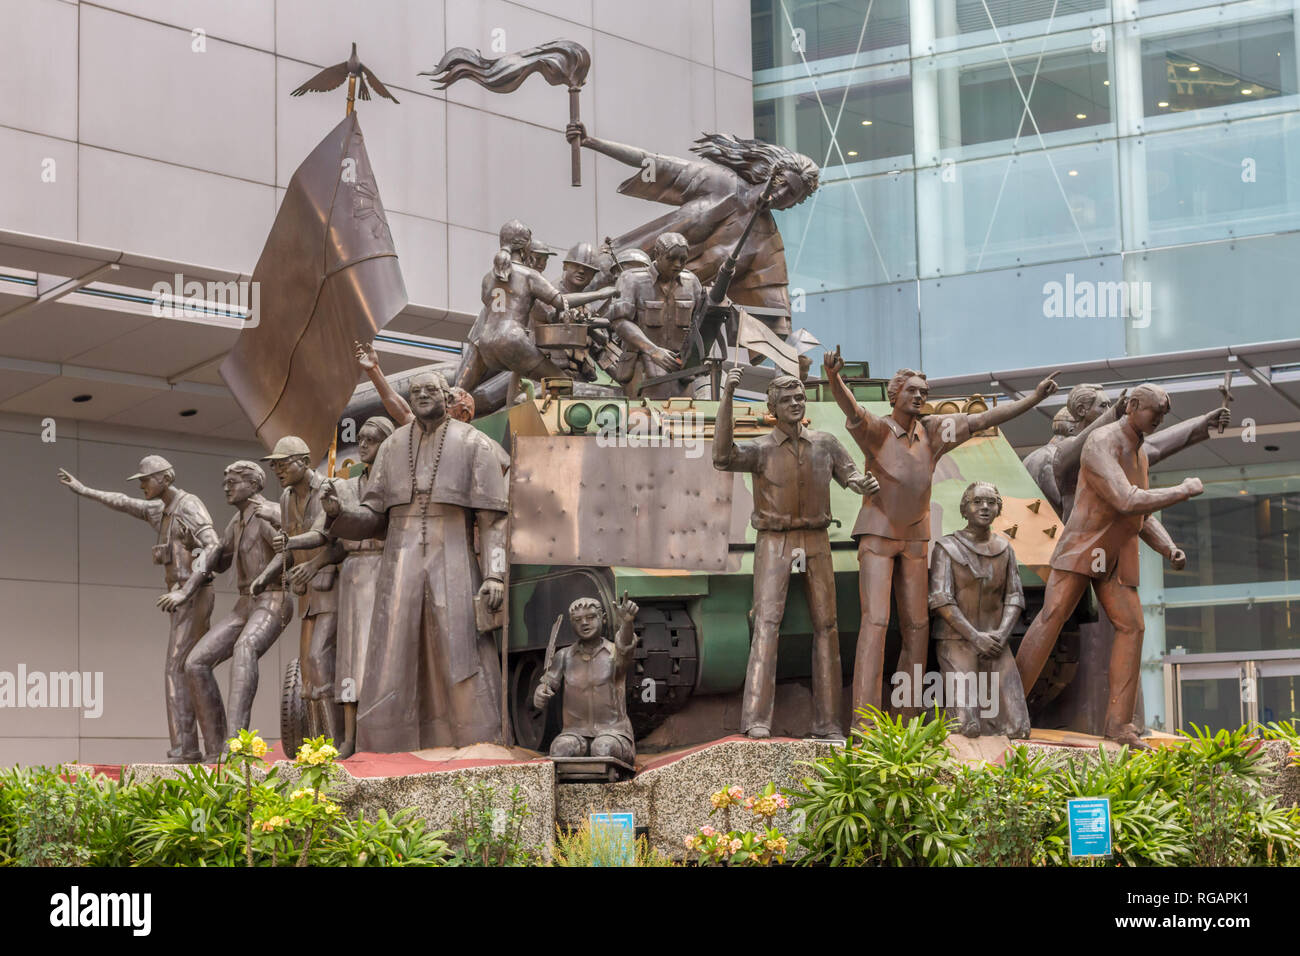 The Spirit of EDSA sculpture in Makati commemorating 1986 evolution that led to departure of Philippine president Ferdinand Marcos. Stock Photo